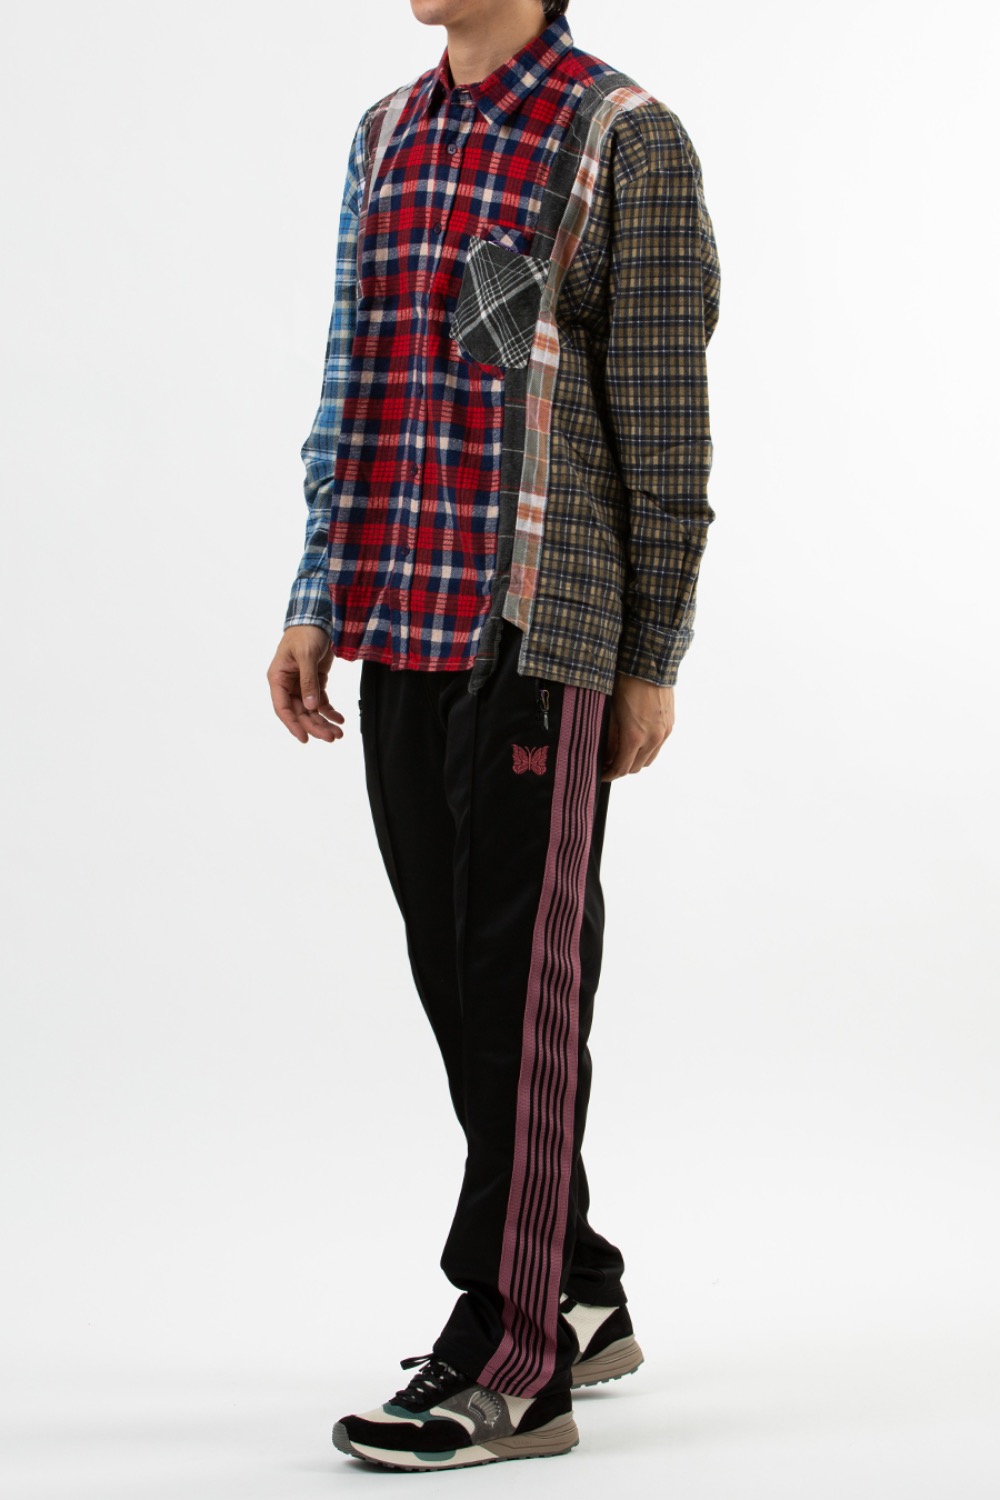 (22FW) - LQ306 Rebuild by Needles Flannel Shirt -&gt; 7 Cuts Wide Shirt (FREE - 11) ASSORTED